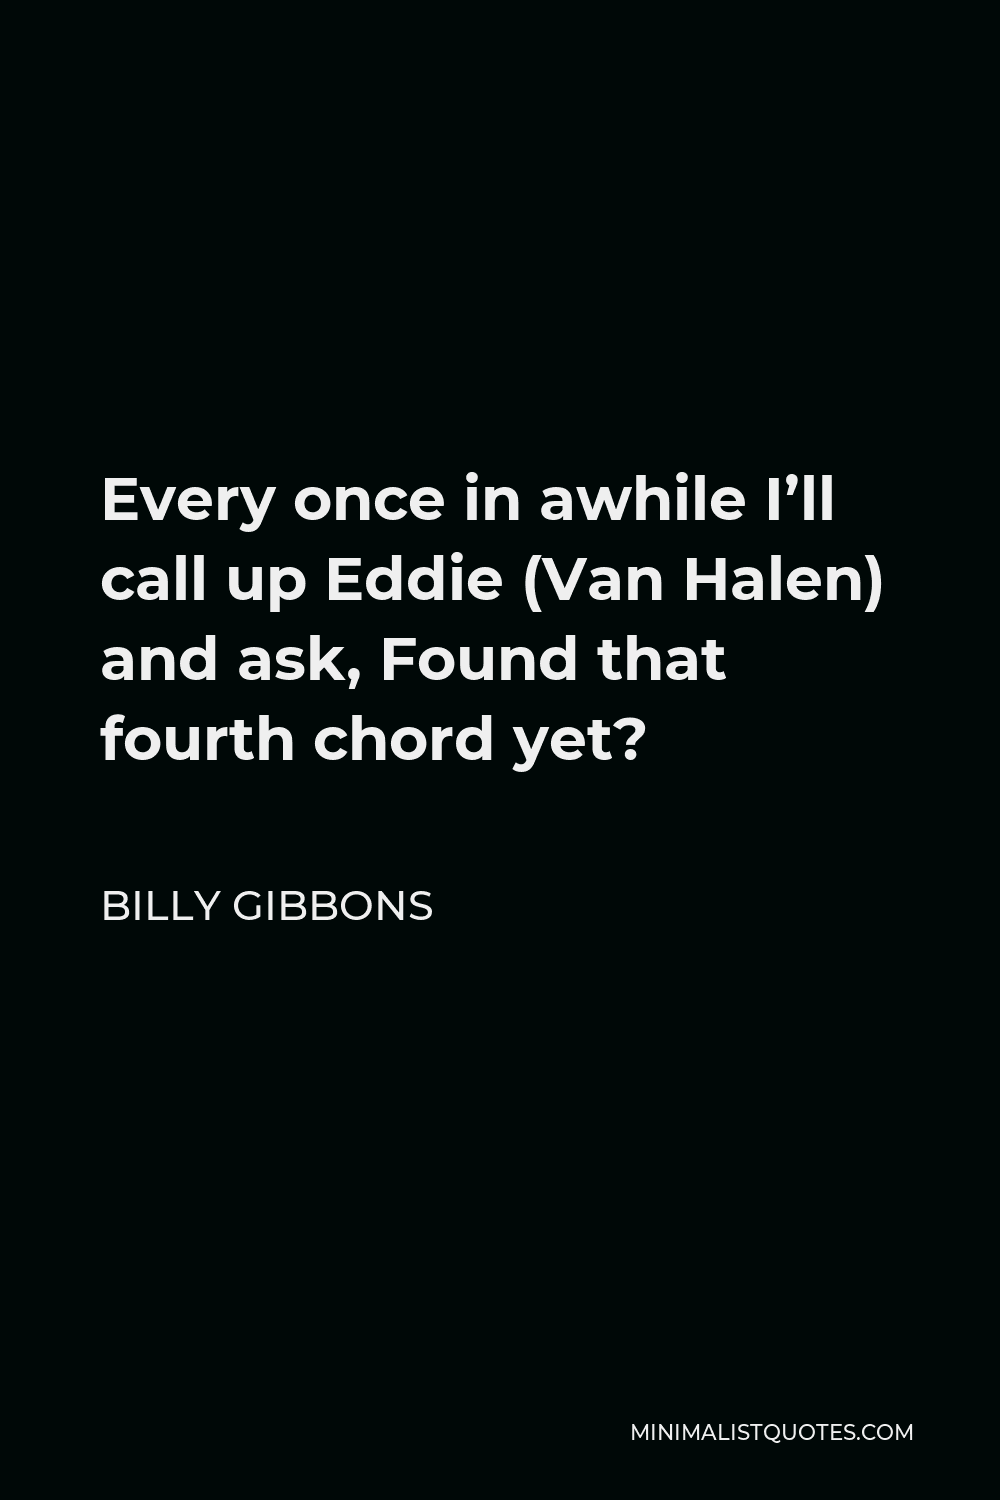 Billy Gibbons Quote - Every once in awhile I’ll call up Eddie (Van Halen) and ask, Found that fourth chord yet?